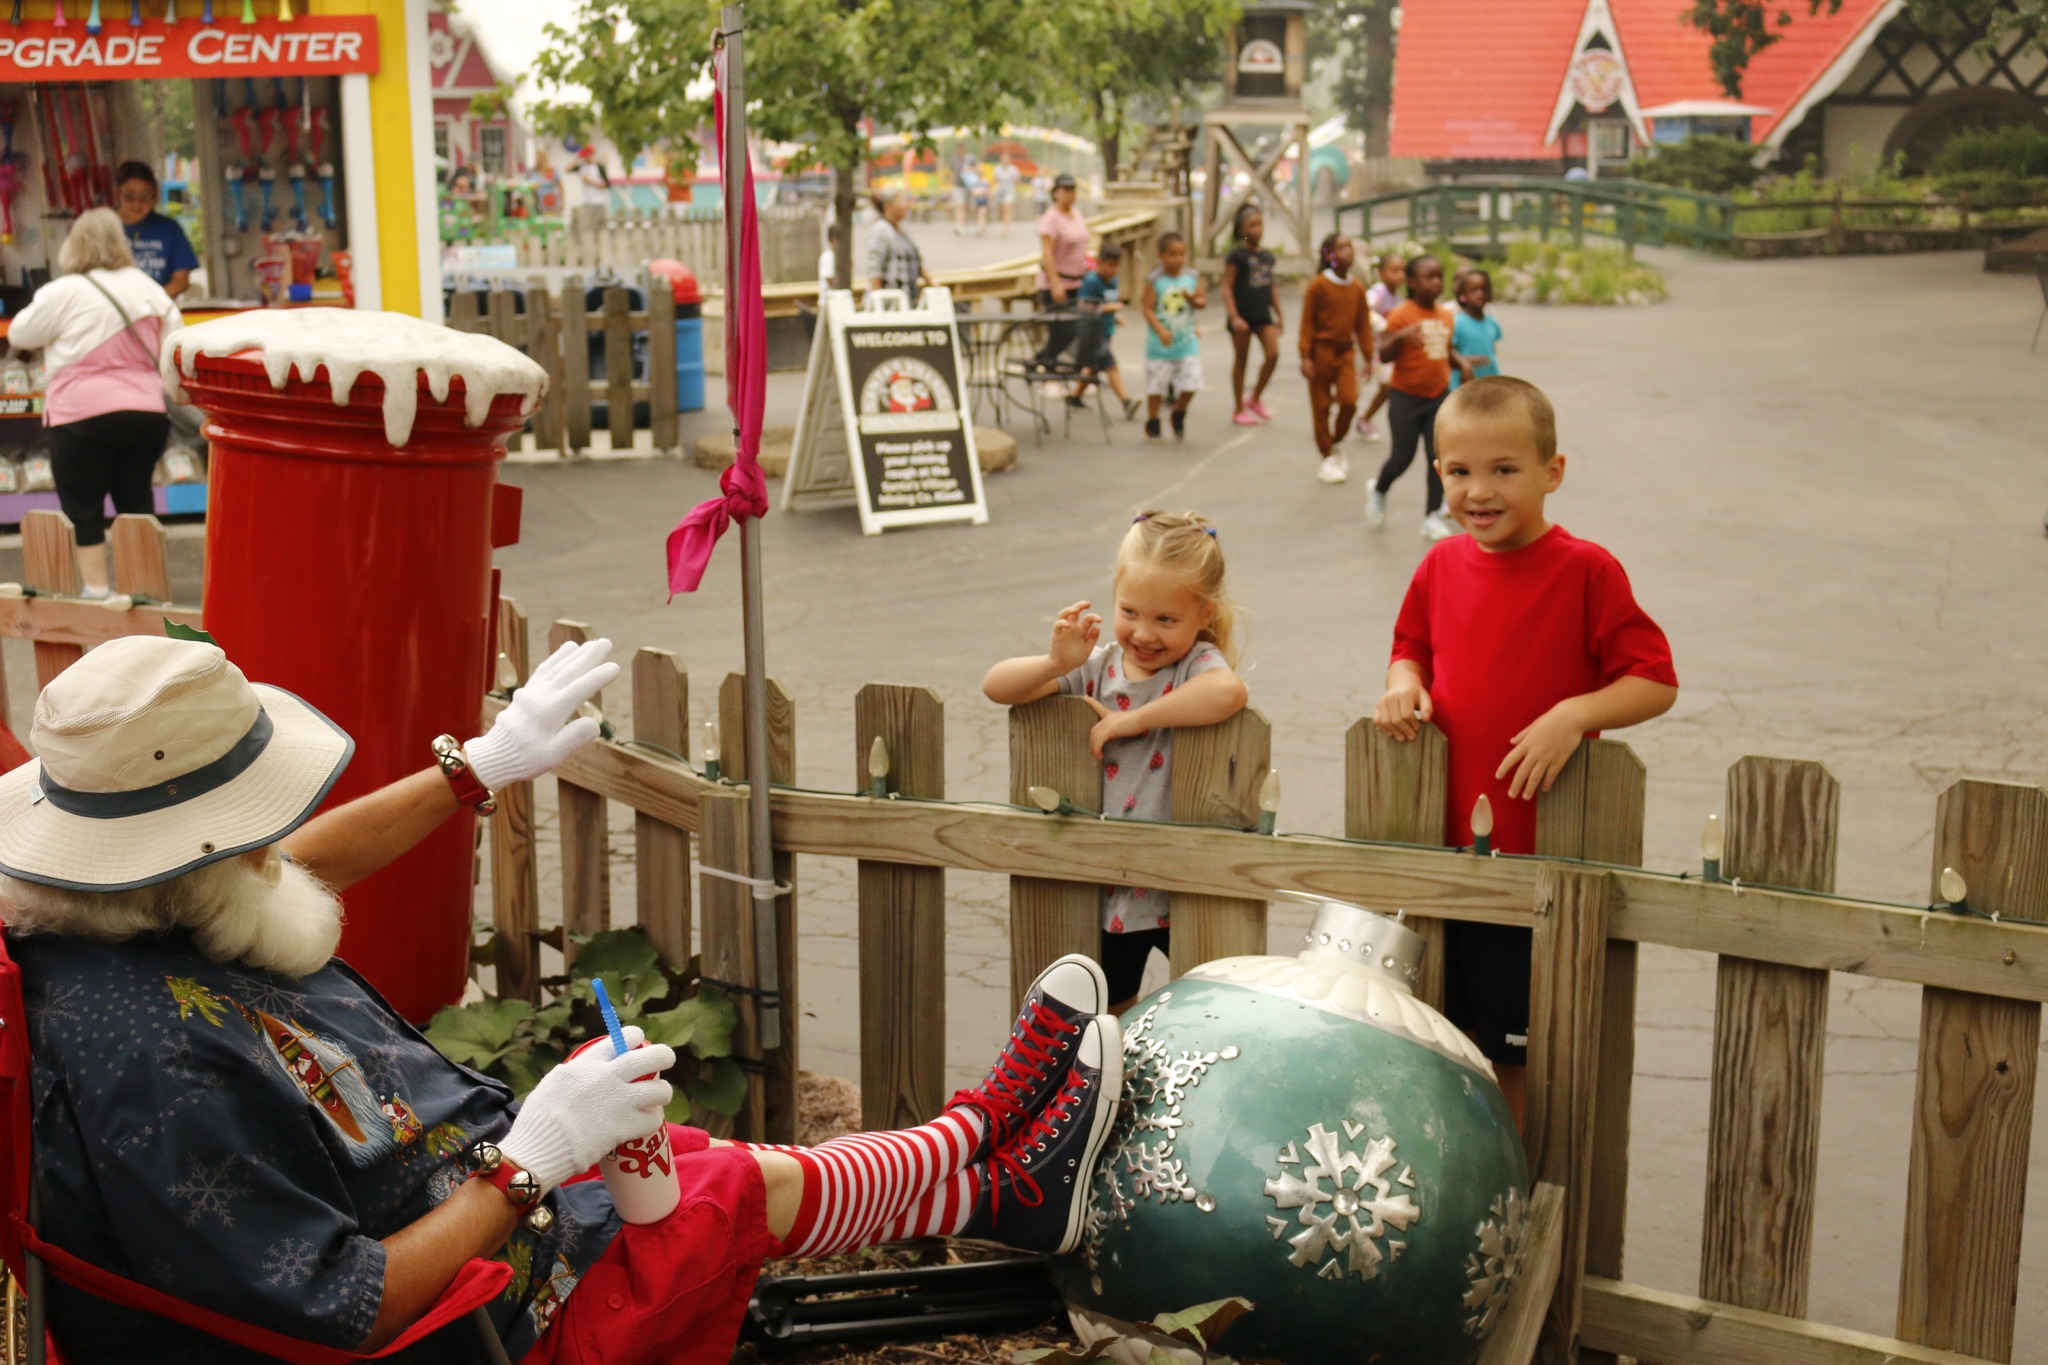 <h1 class="tribe-events-single-event-title">Lots of Family Fun going on at Santa’s Village Amusement & Water Park</h1>